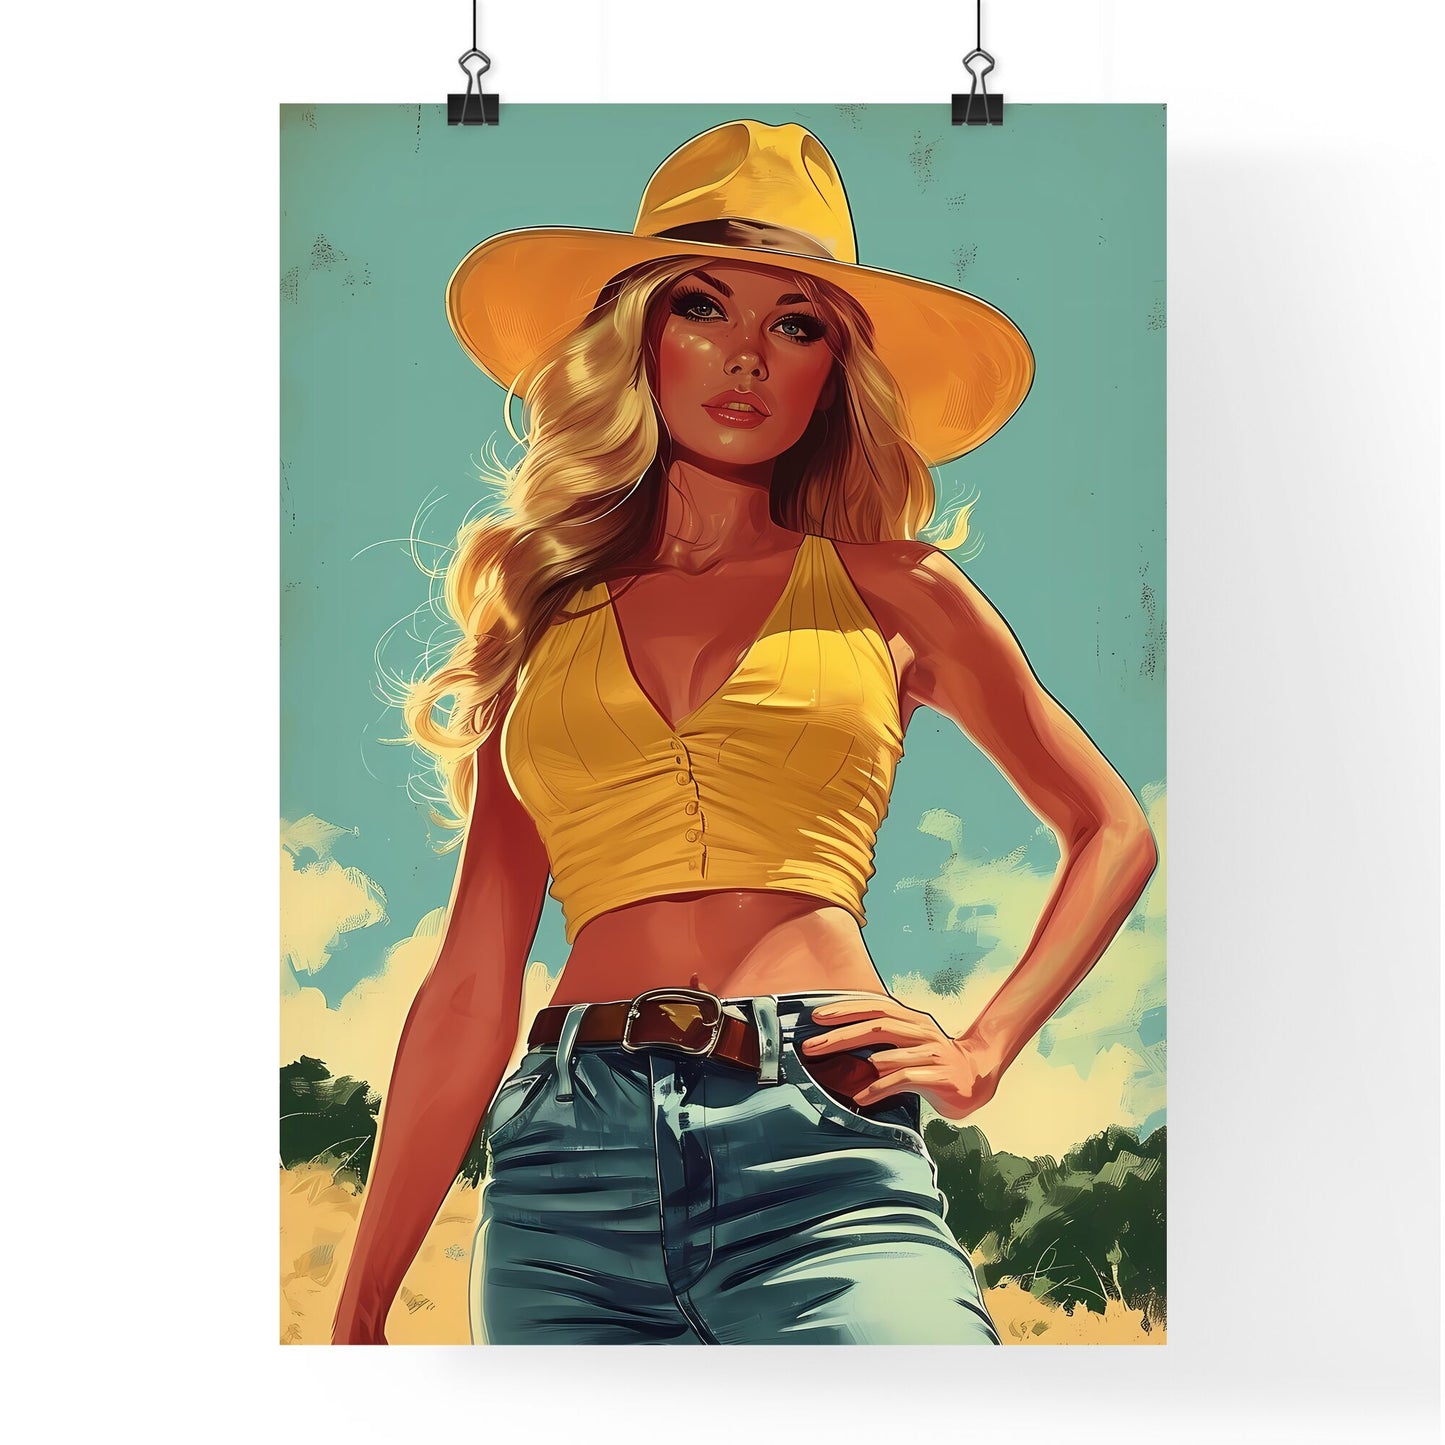 Vintage hipster woman - Art print of a woman wearing a hat and shorts Default Title